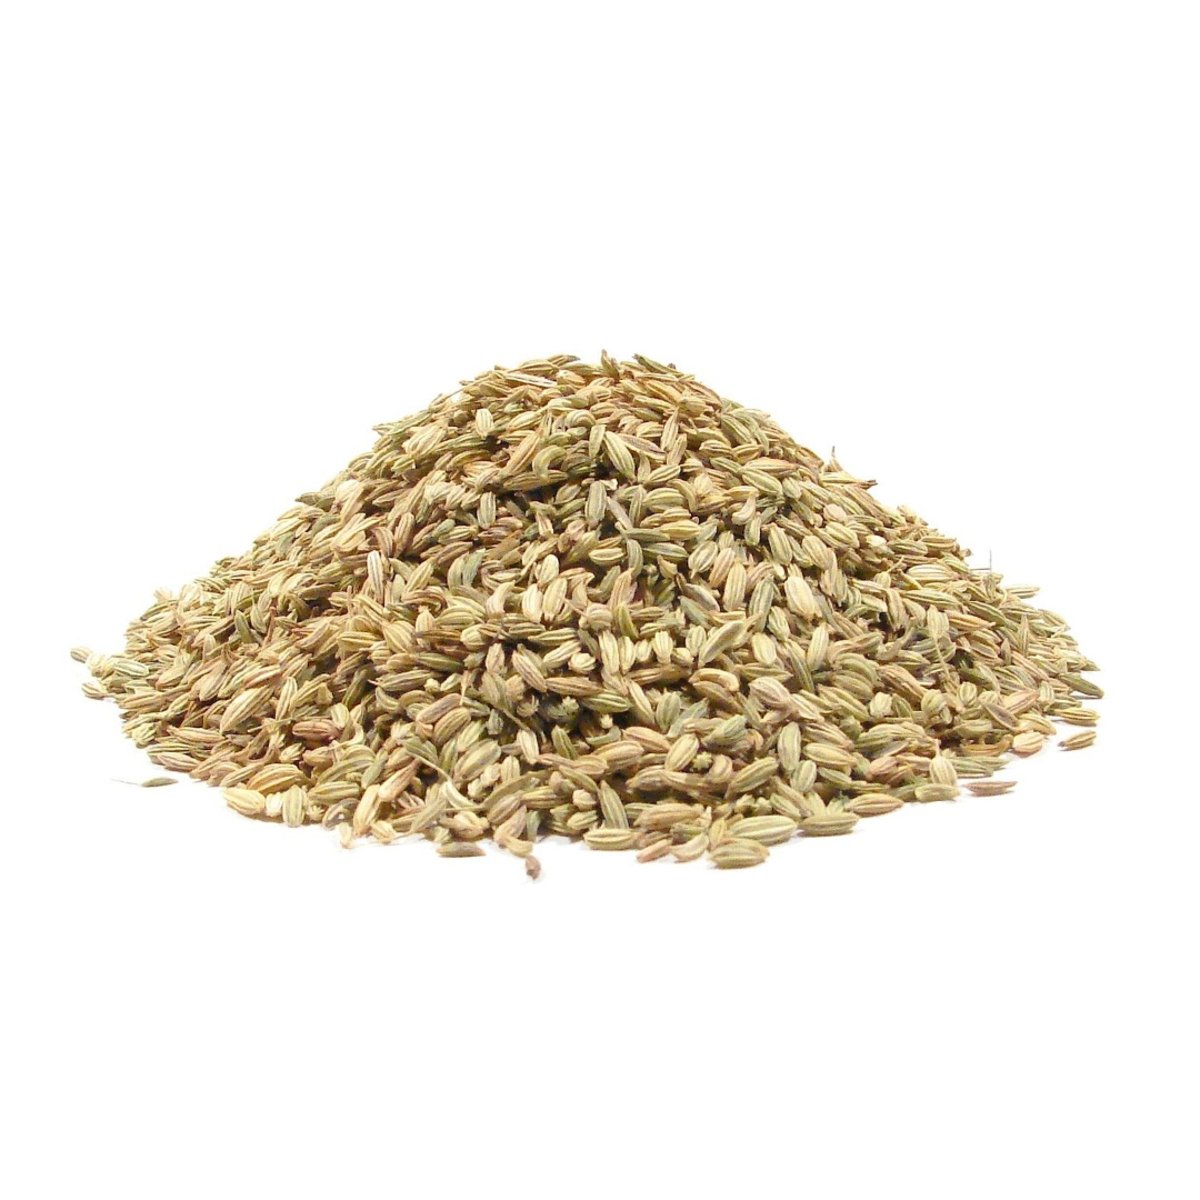 Fennel Seed 100g Approx Weight